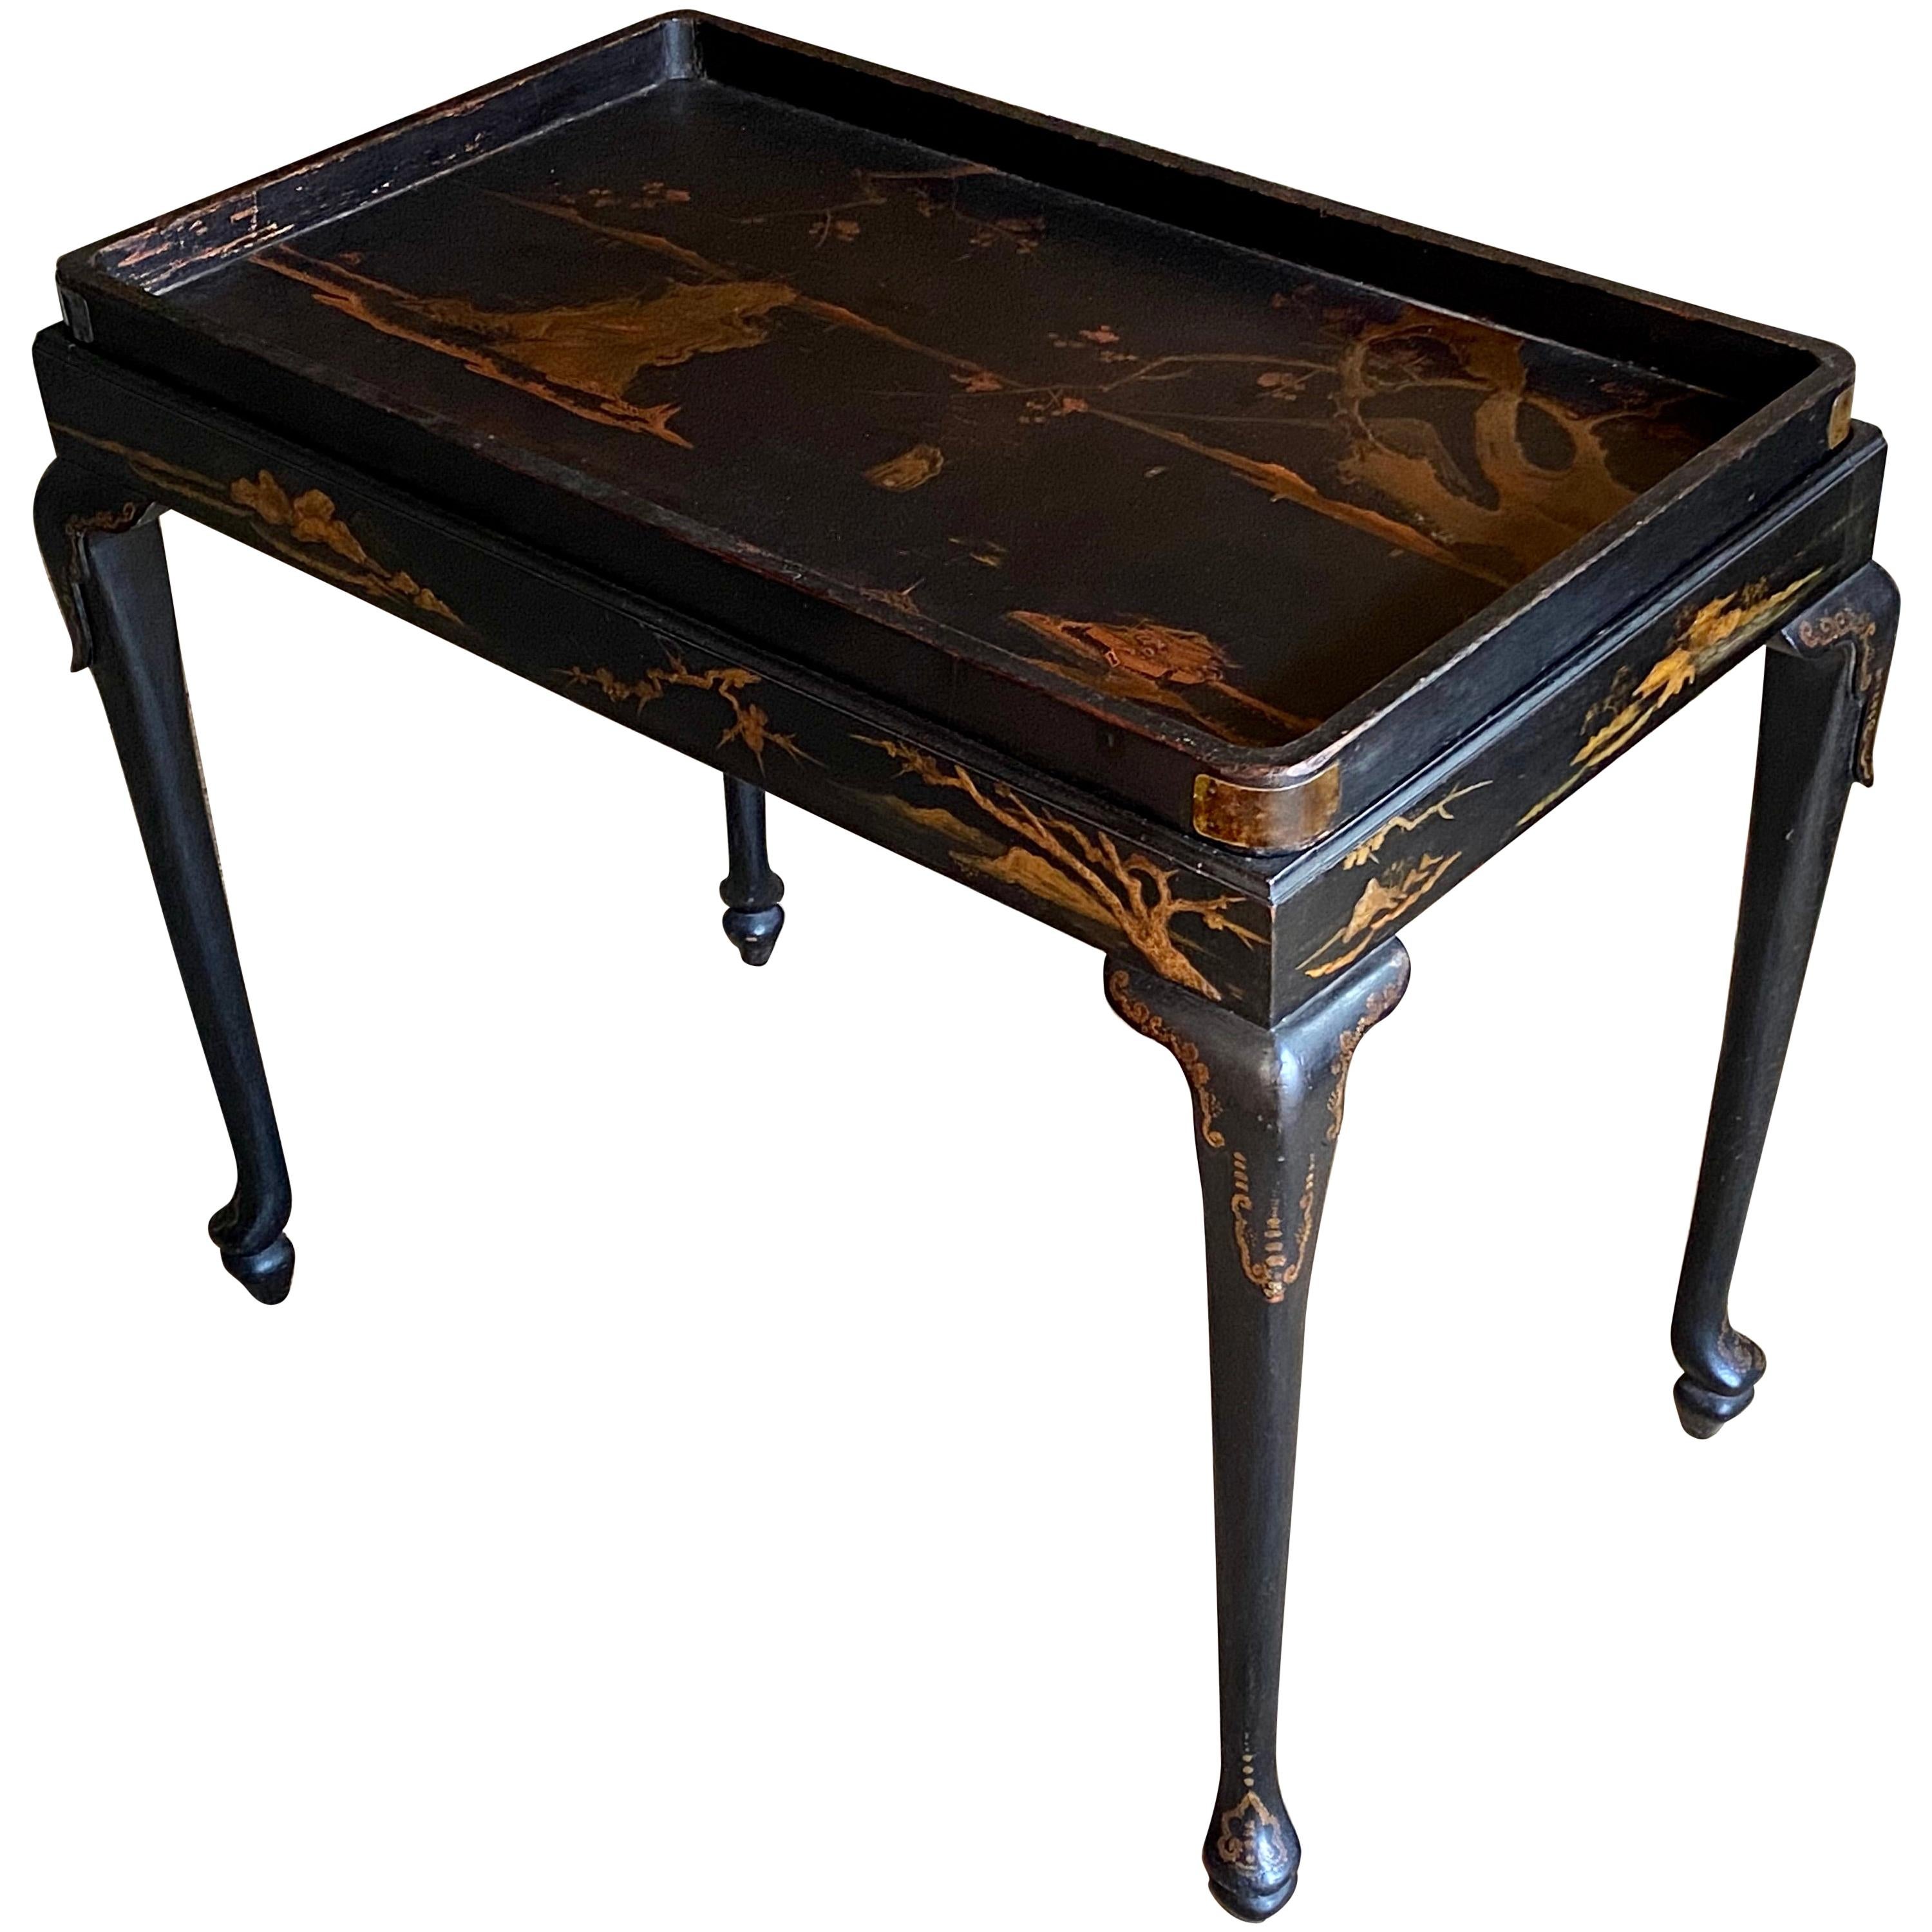 Rare Japanese Export Lacquer Chinoiserie Table, circa 1740